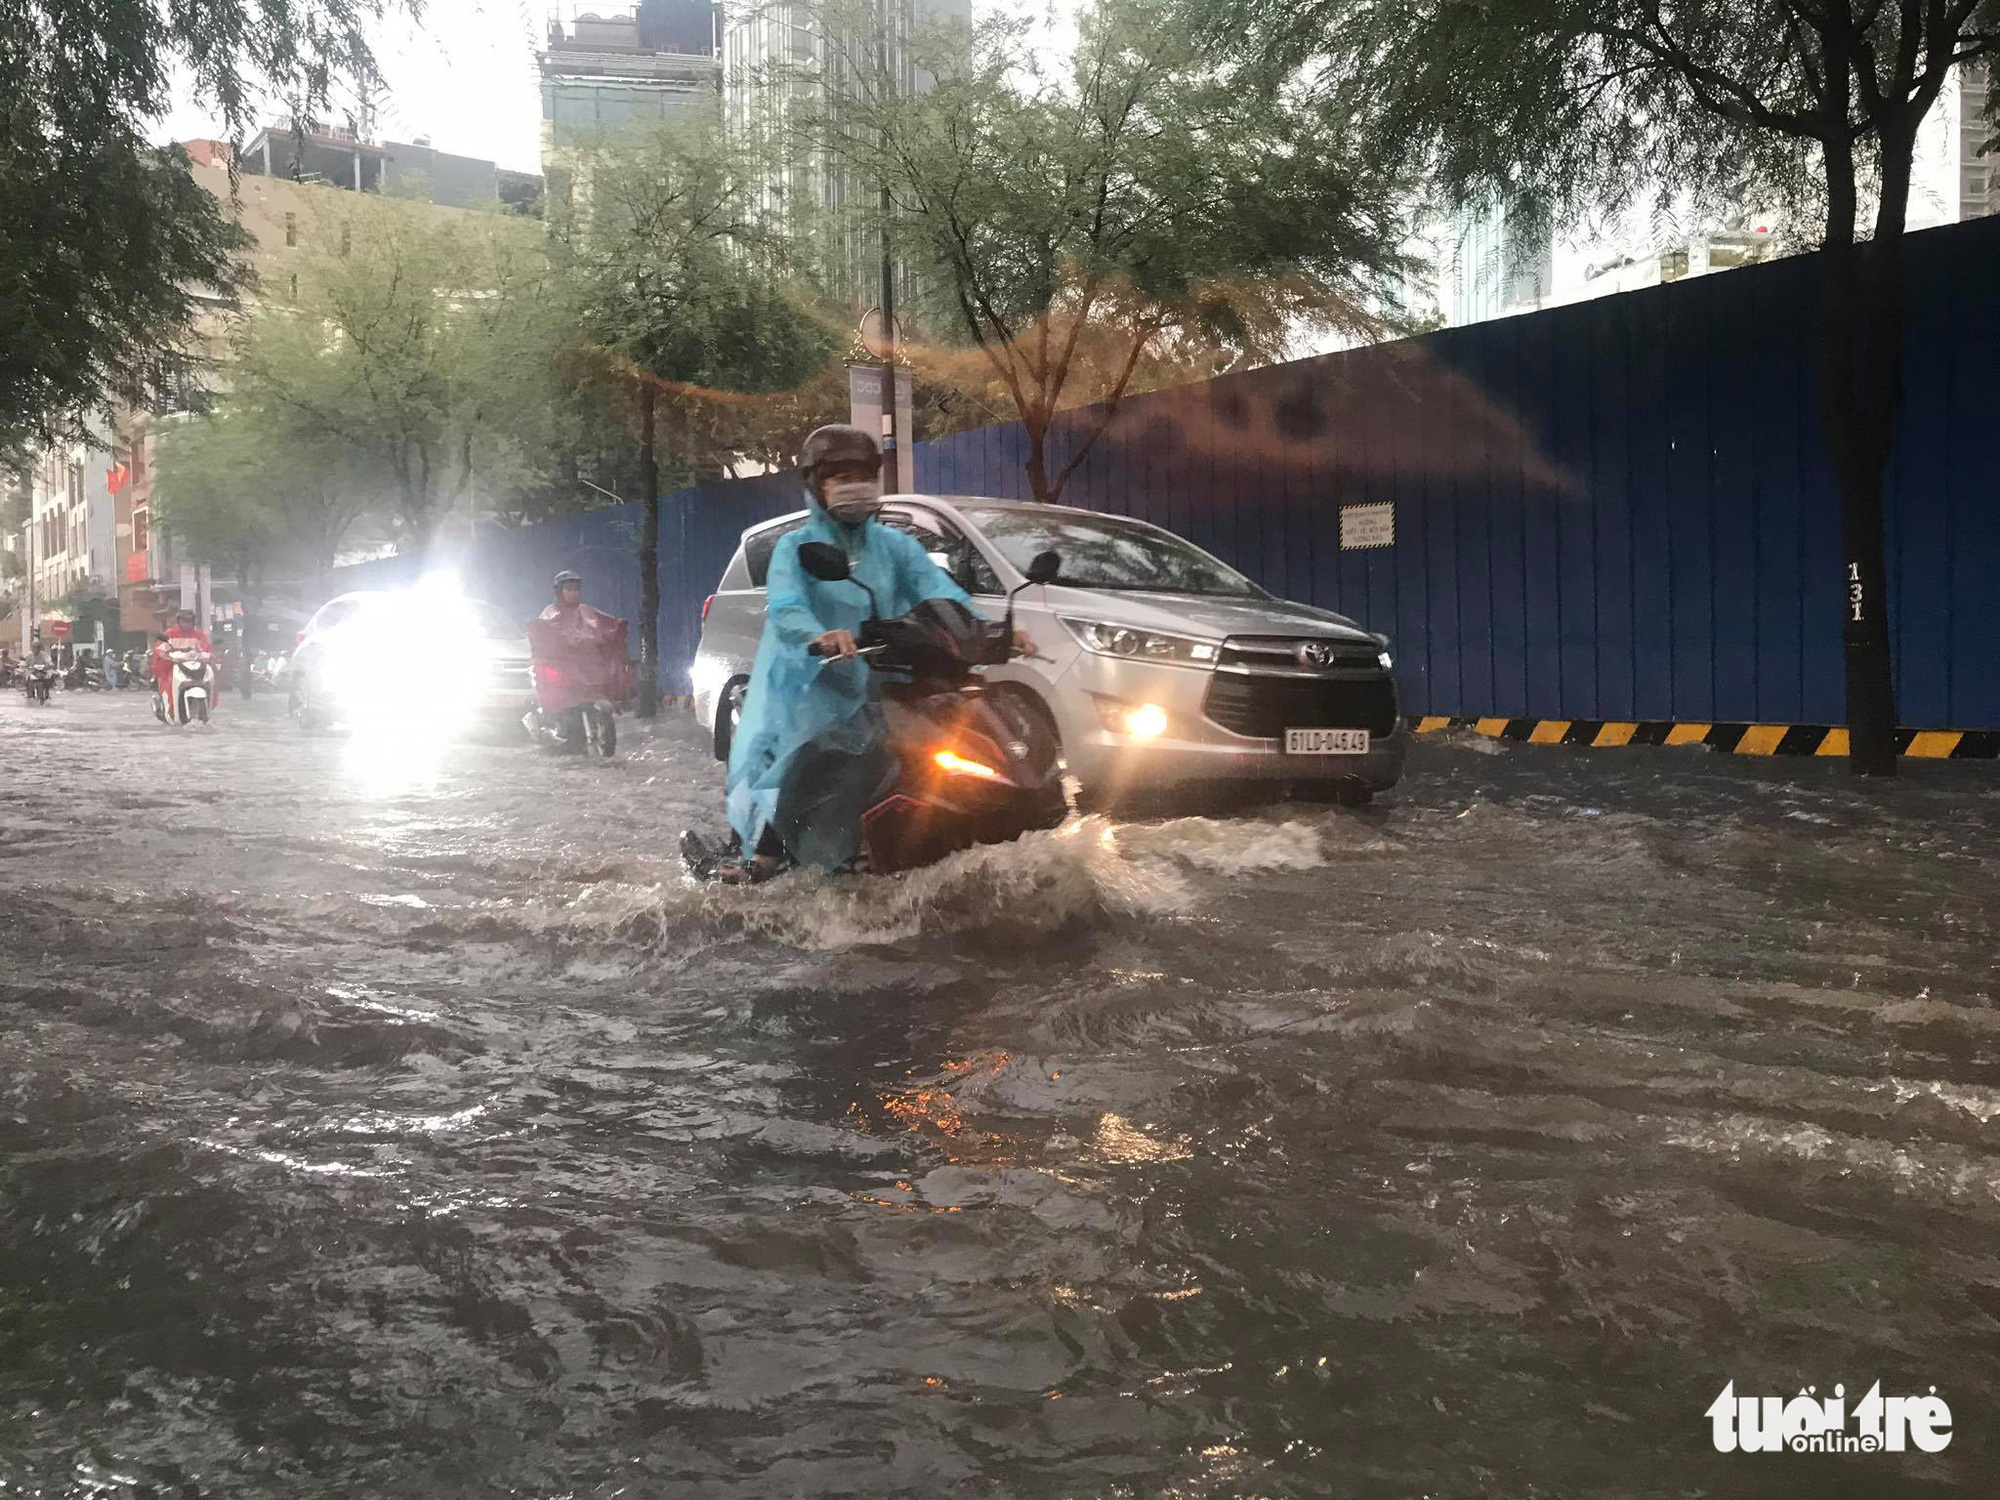 Le Thanh Ton Street in District 1, Ho Chi Minh City is submerged during a downpour on June 16. 2020. Photo: Ngoc Phuong / Tuoi Tre